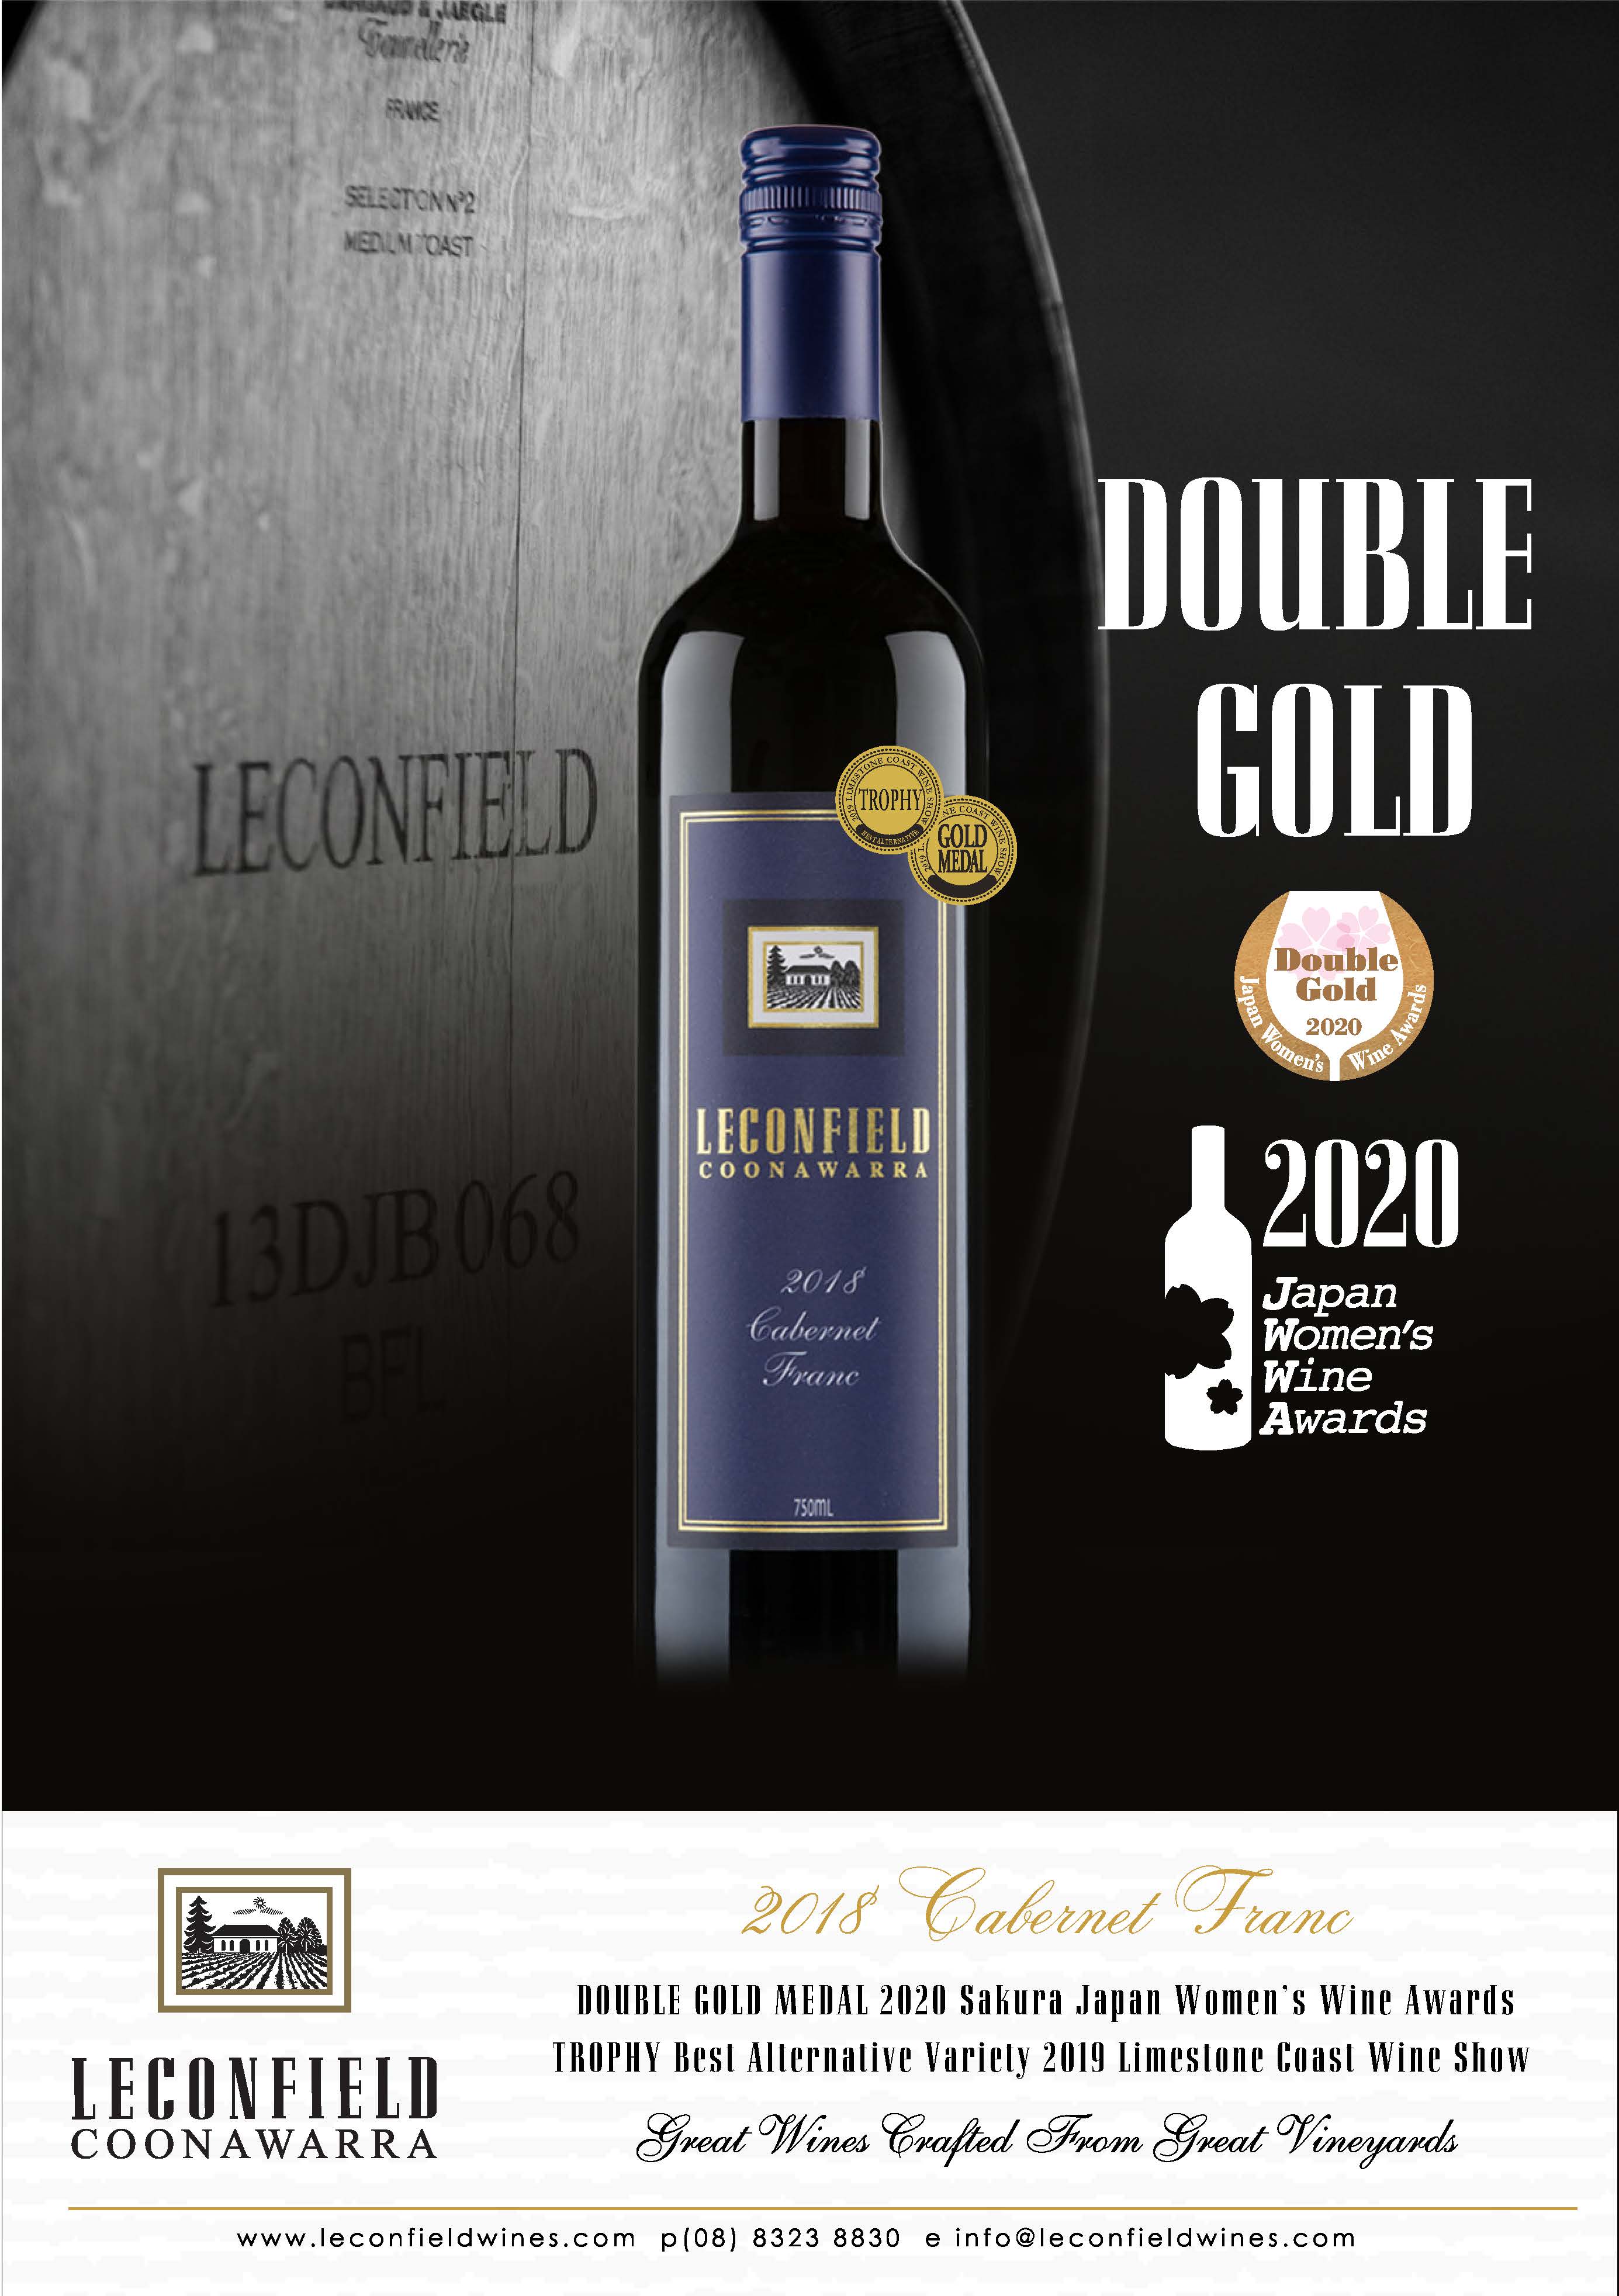 Four Double Gold Medals for Leconfield & Richard Hamilton Wines